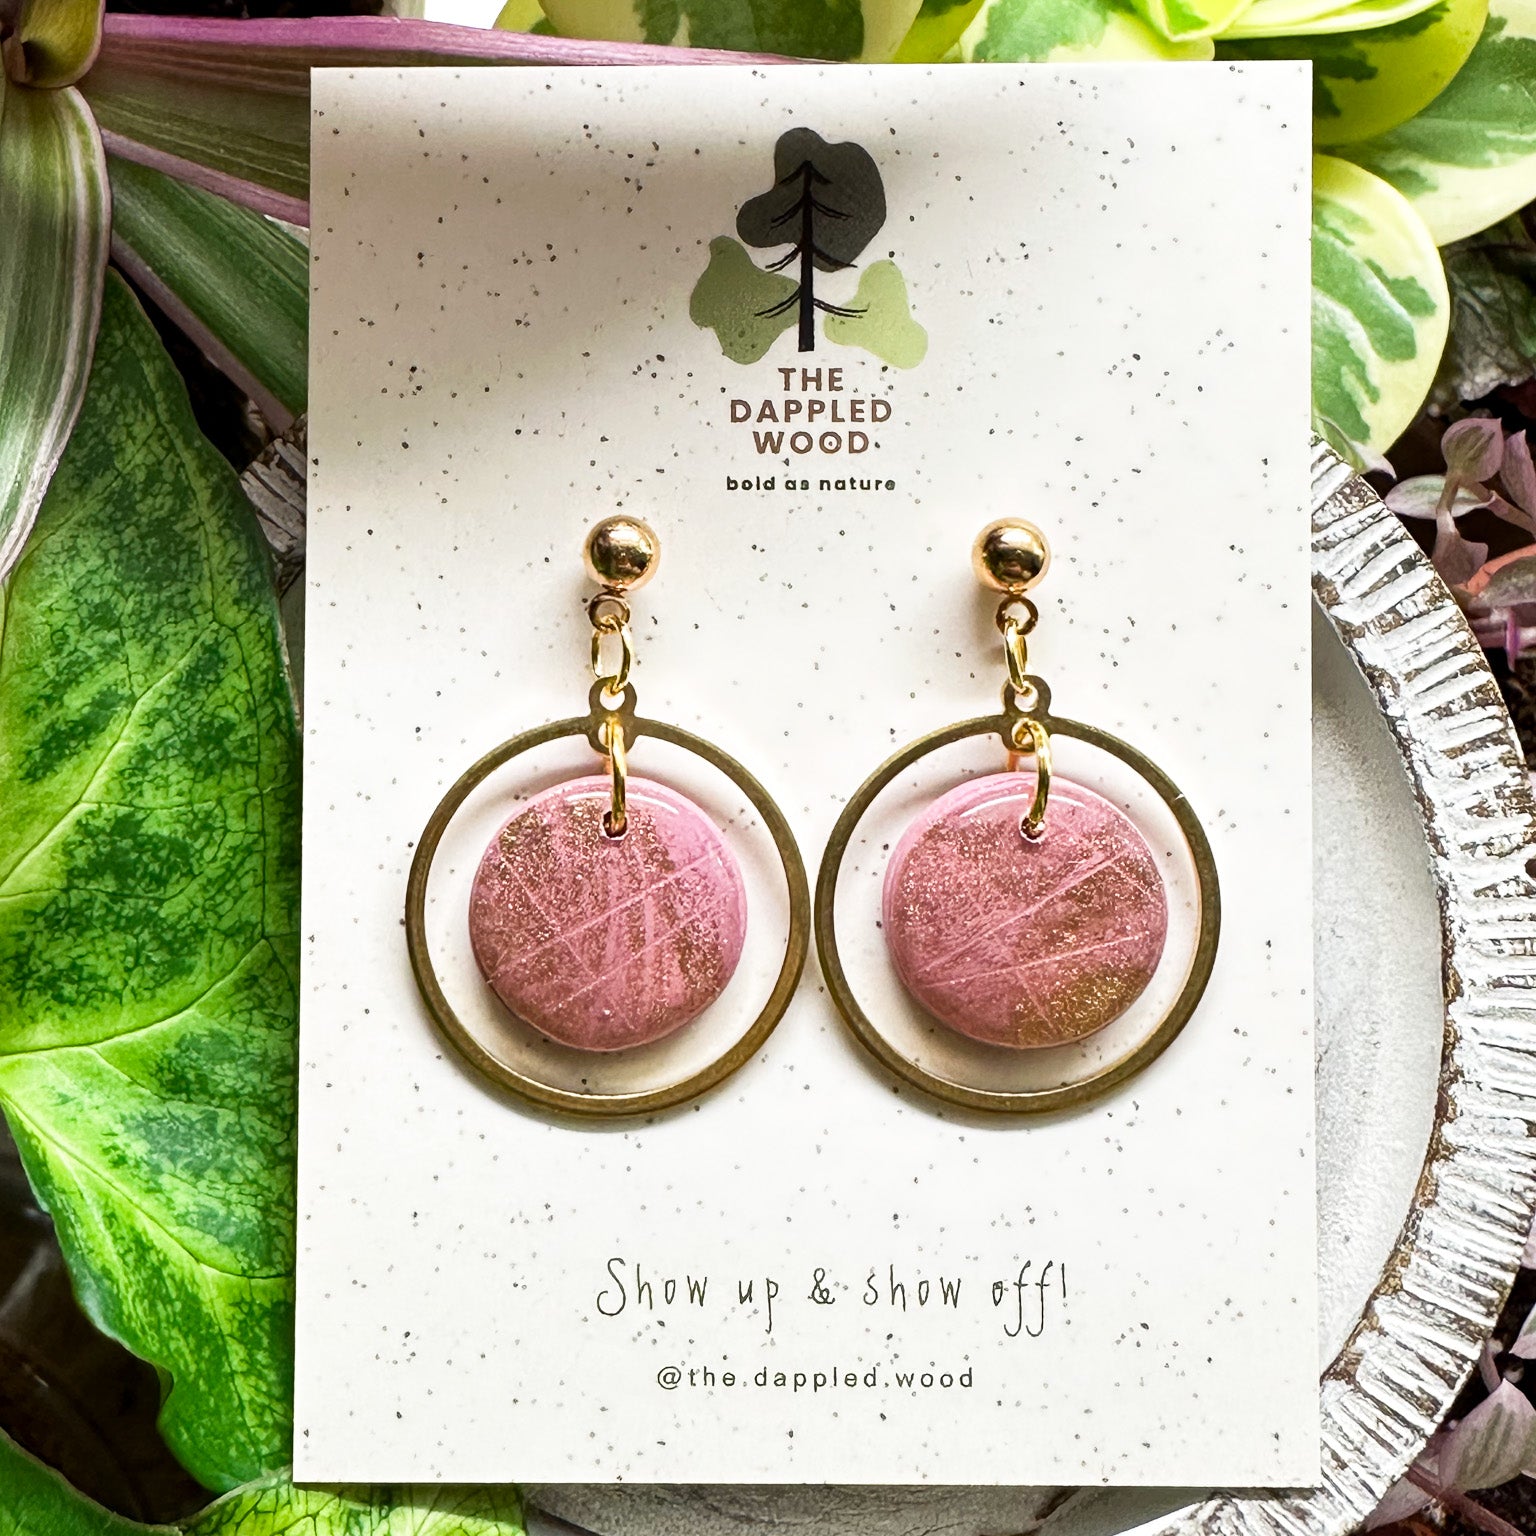 Handcrafted 'Michele' polymer clay earrings featuring shimmering pink circular pendants with gold hoops, displayed on a speckled white card with nature-inspired 'The Dappled Wood' branding, complemented by a lush backdrop of green and pink foliage.